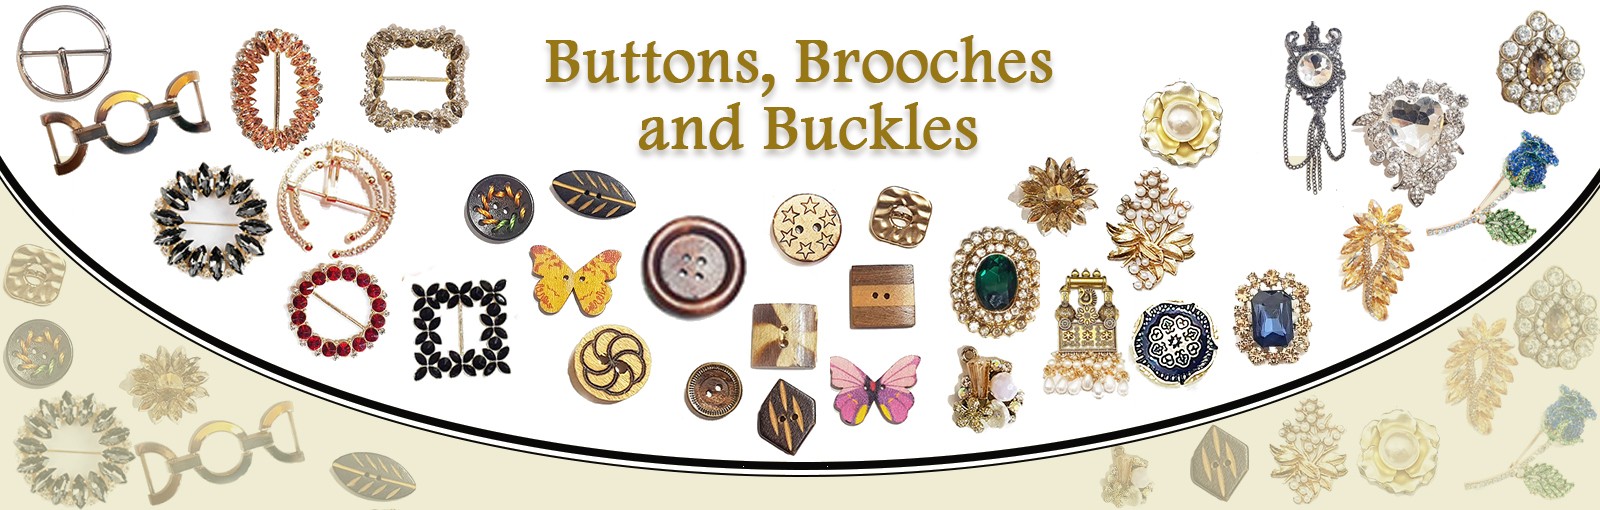 Buttons, Brooches and Buckles